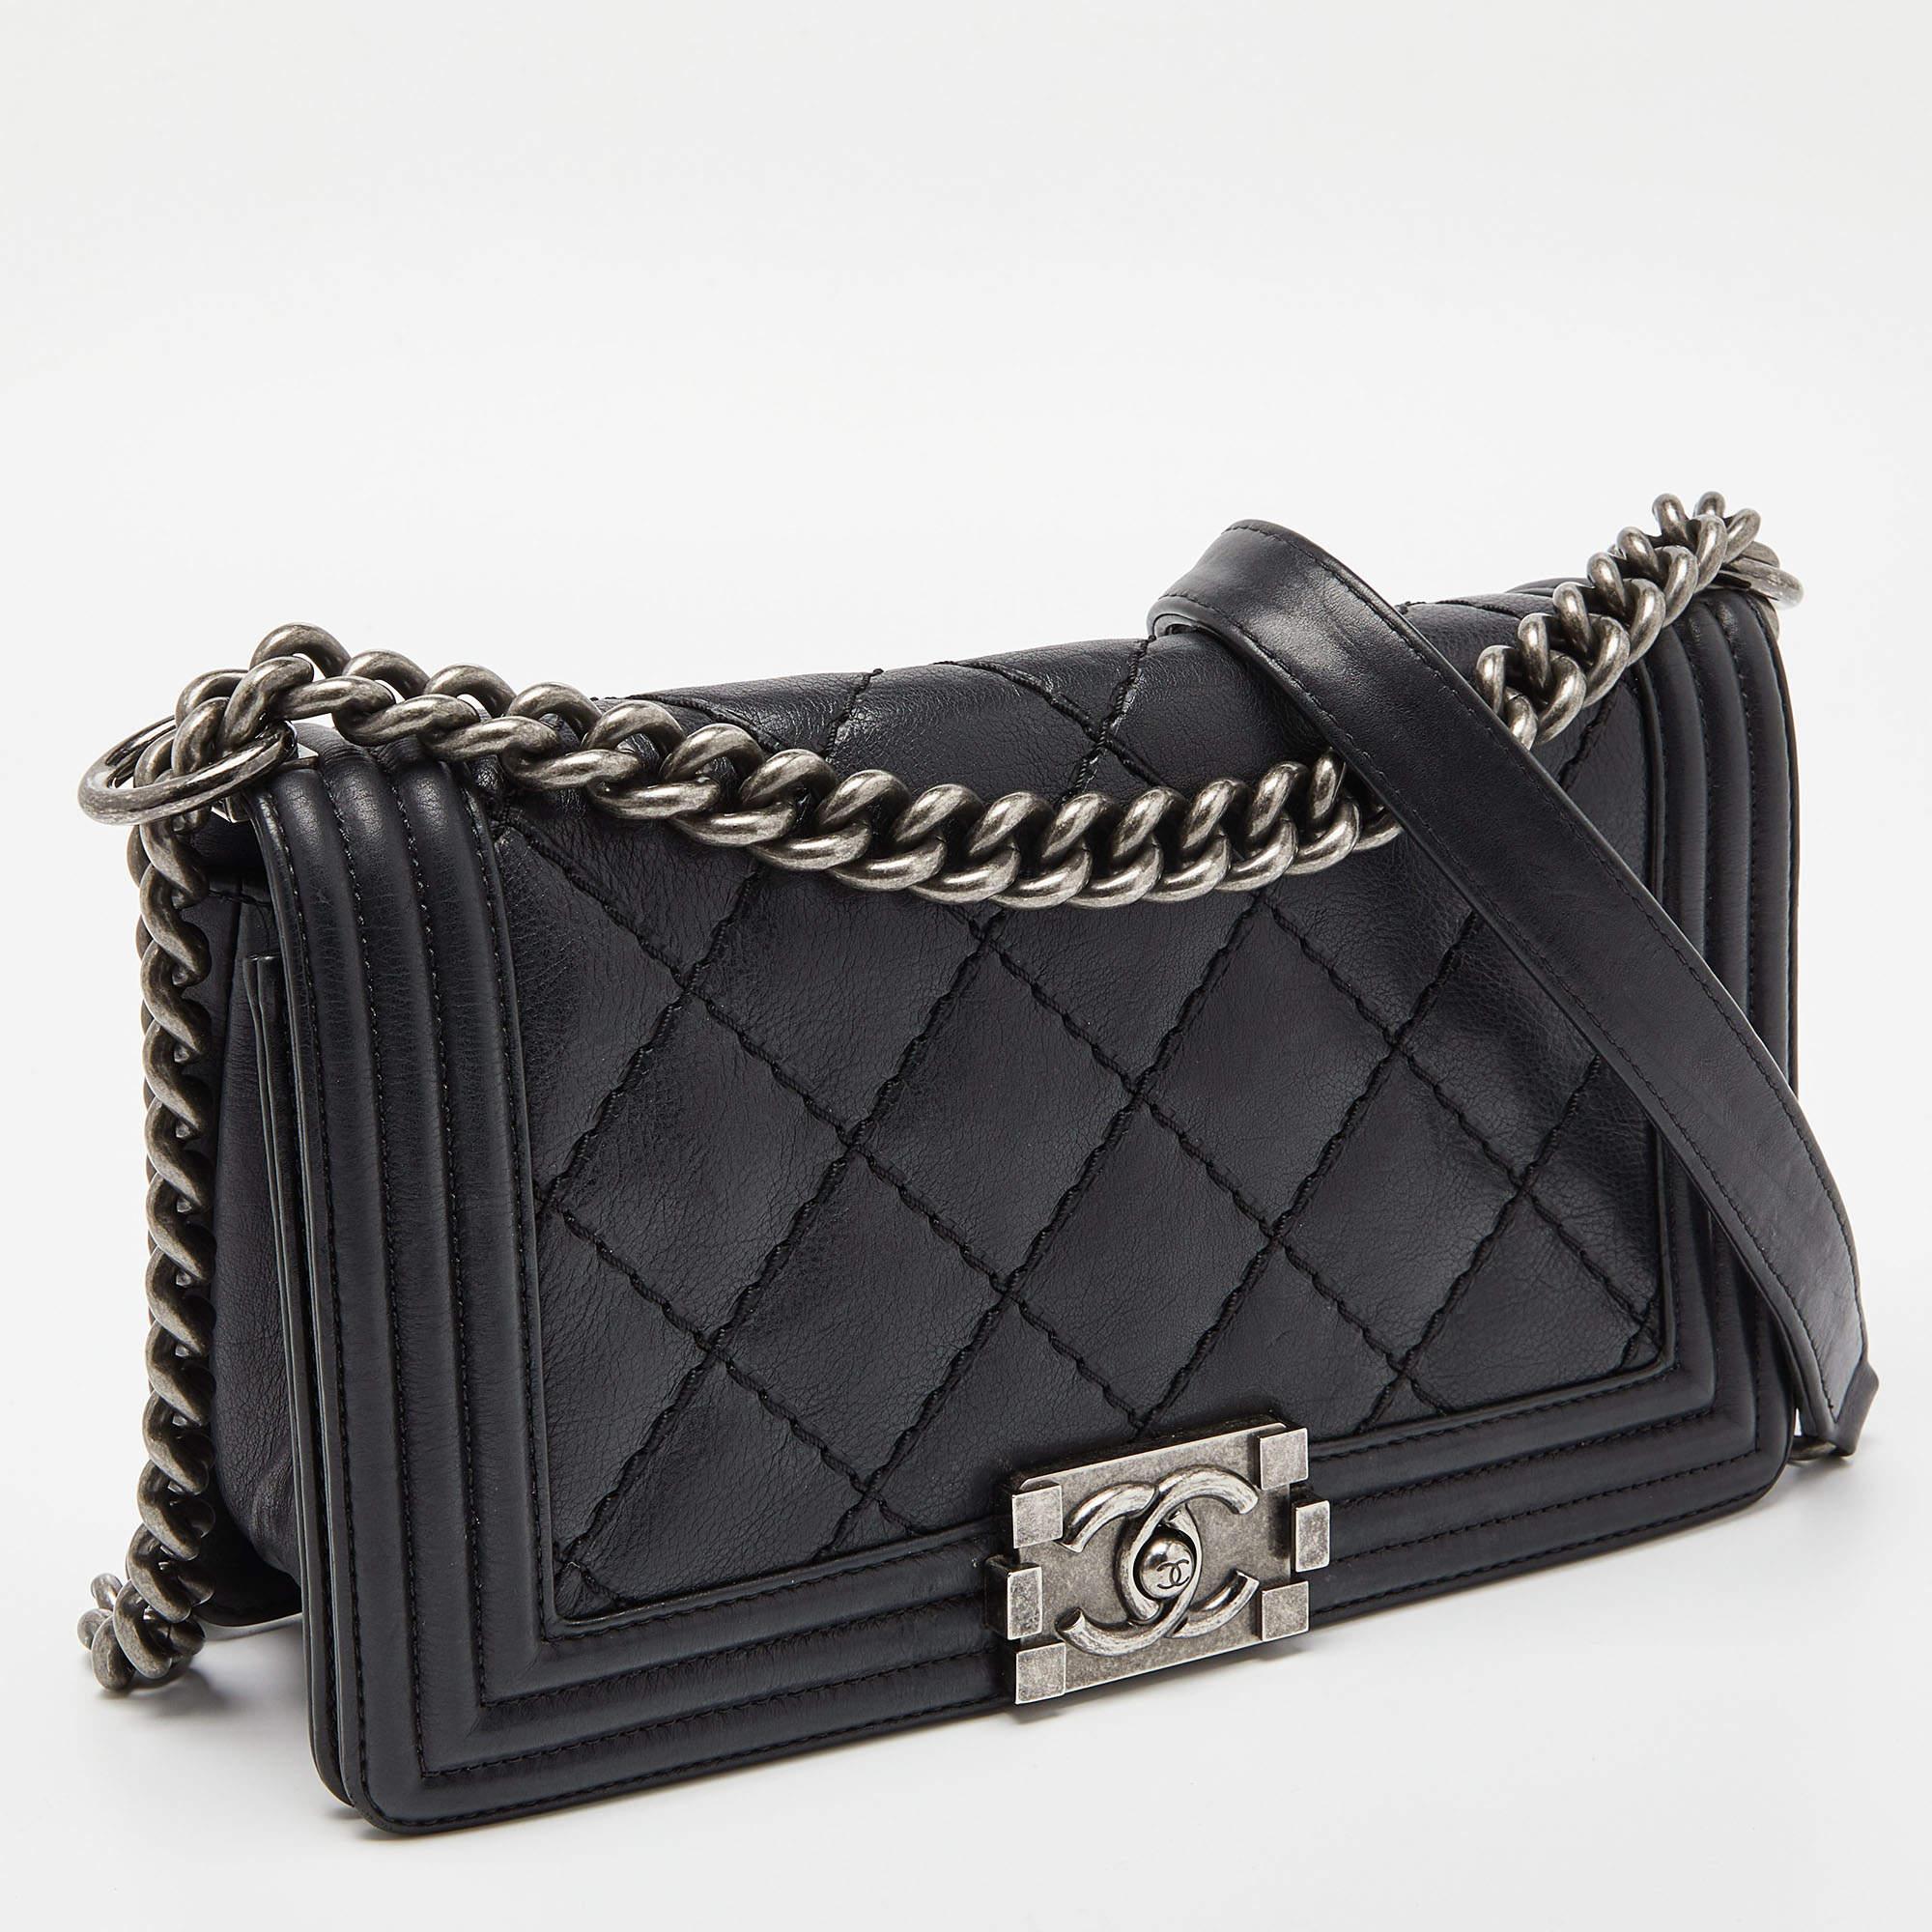 Women's Chanel Black Quilted Leather Medium Double Stitch Boy Flap Bag